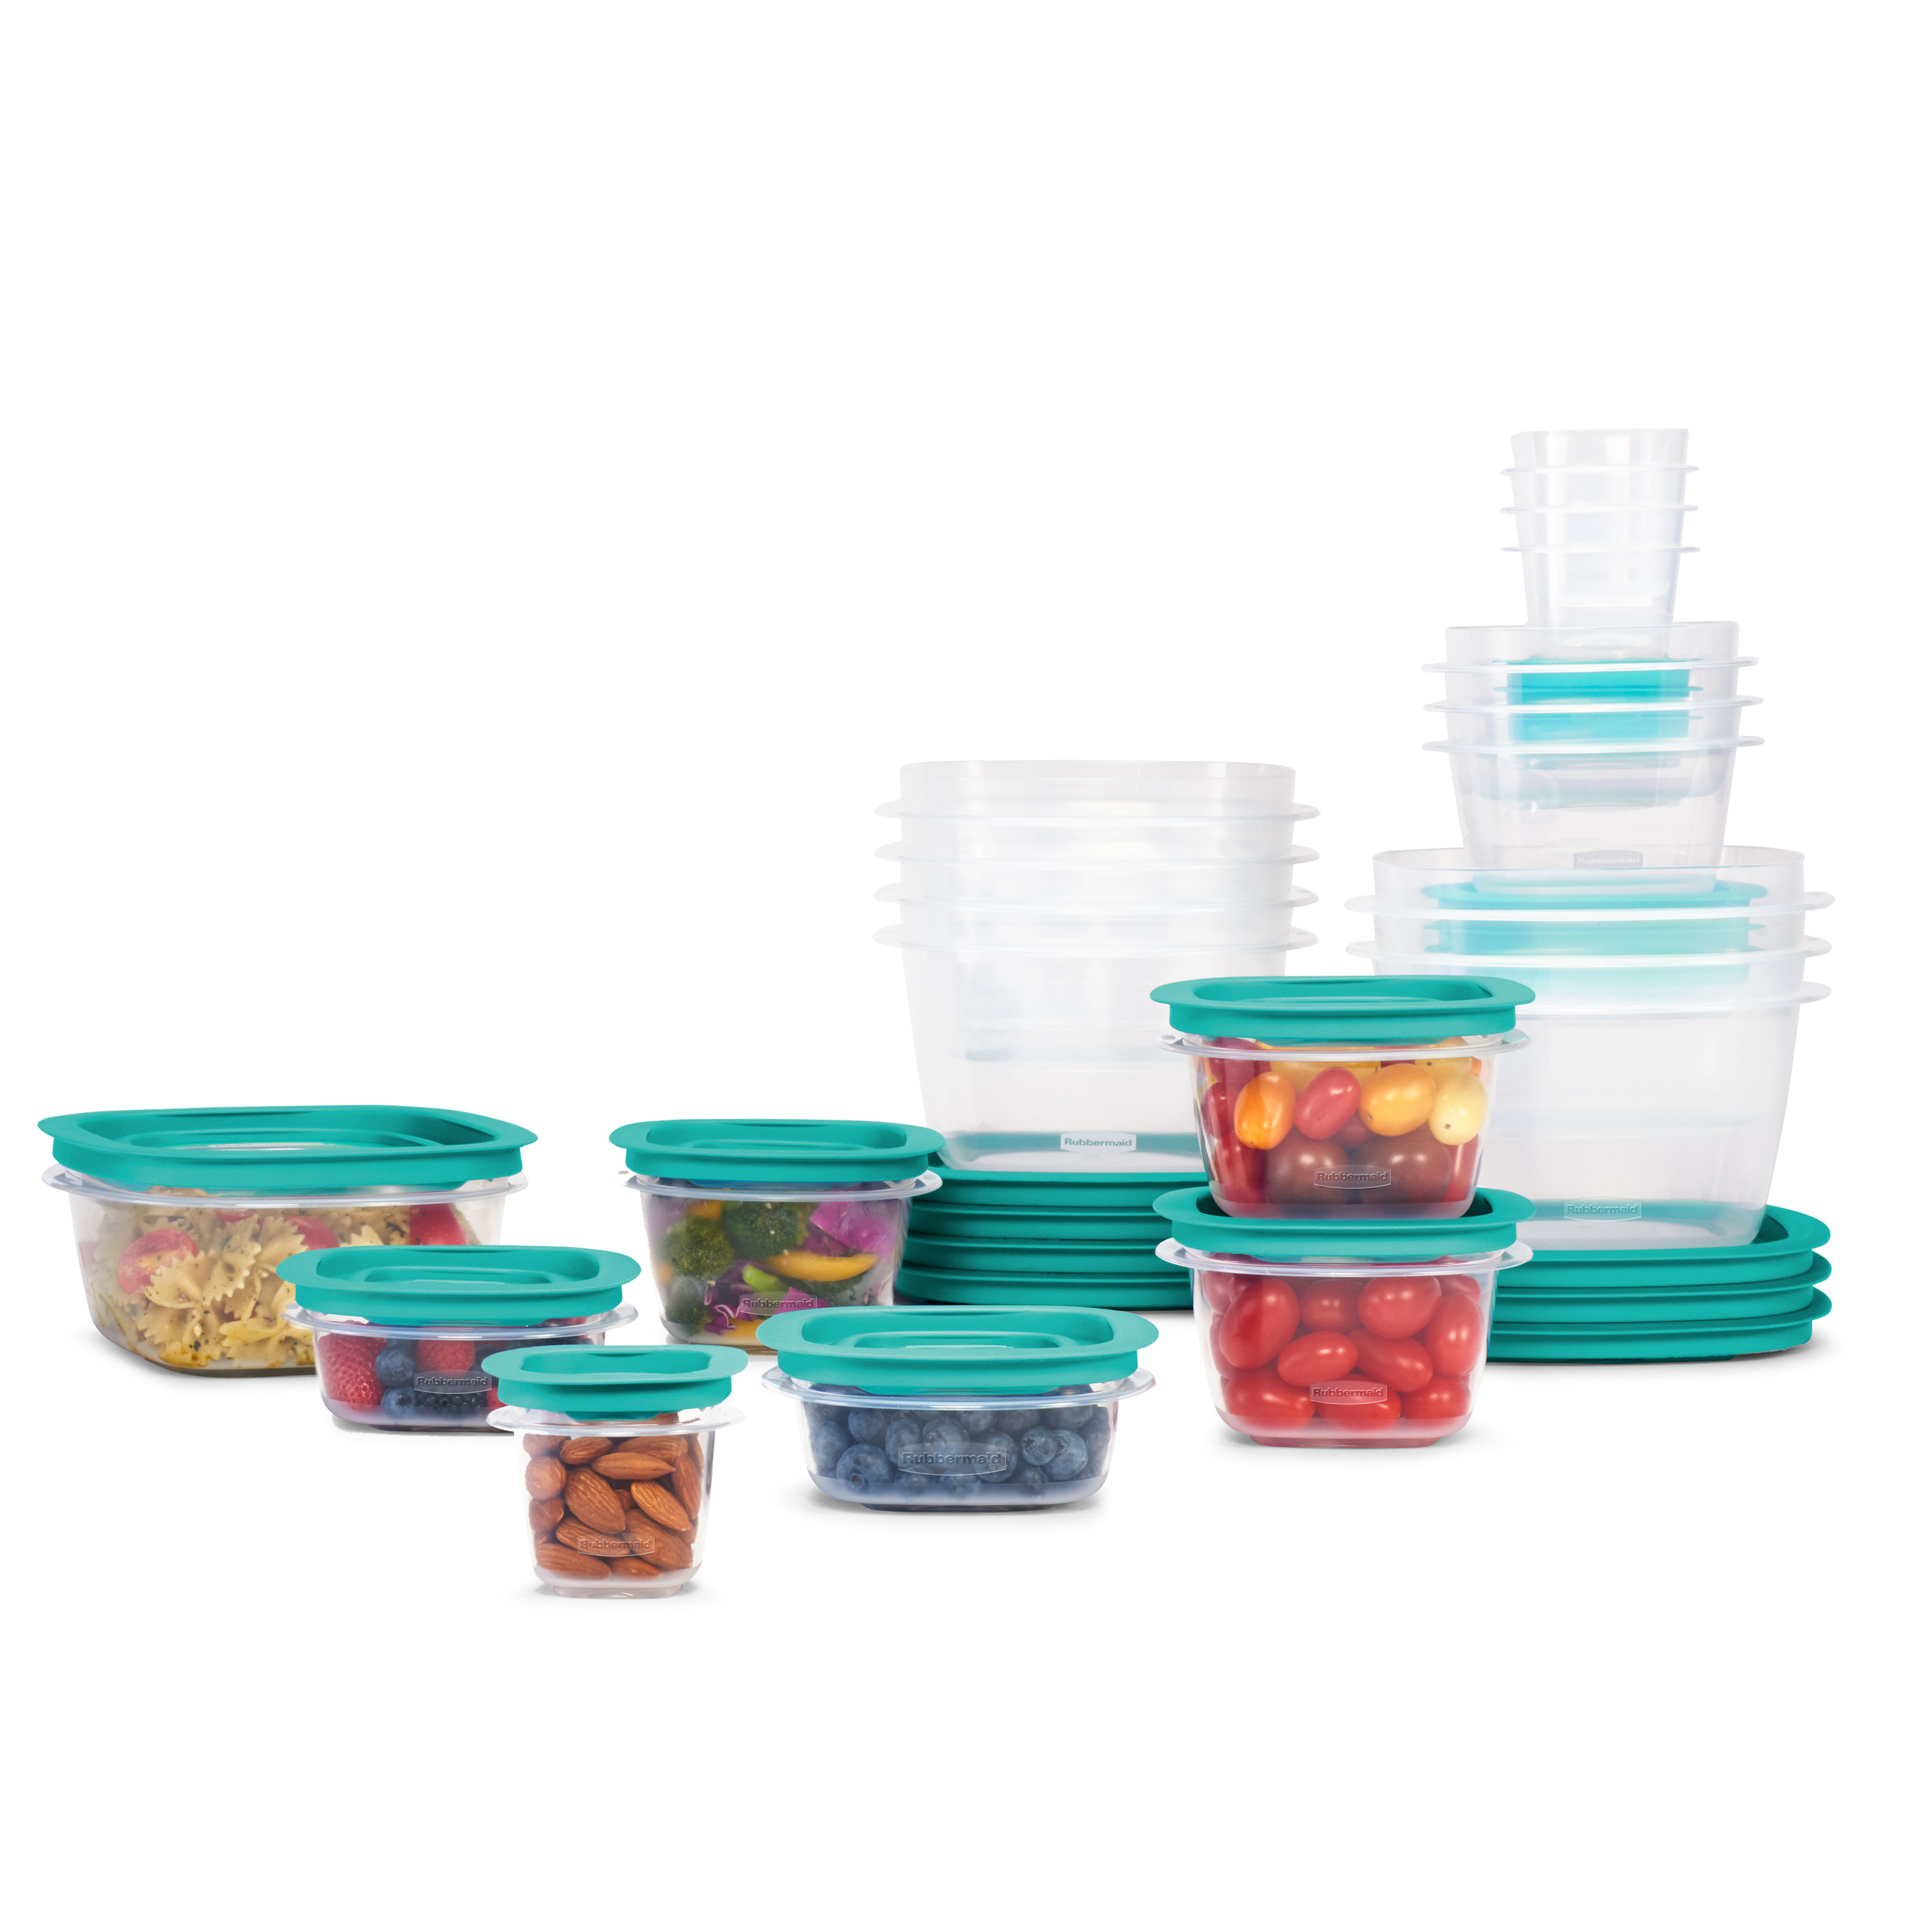 Rubbermaid Press & Lock Easy Find Lids Food Storage Containers, 42-Piece Set - image 1 of 8